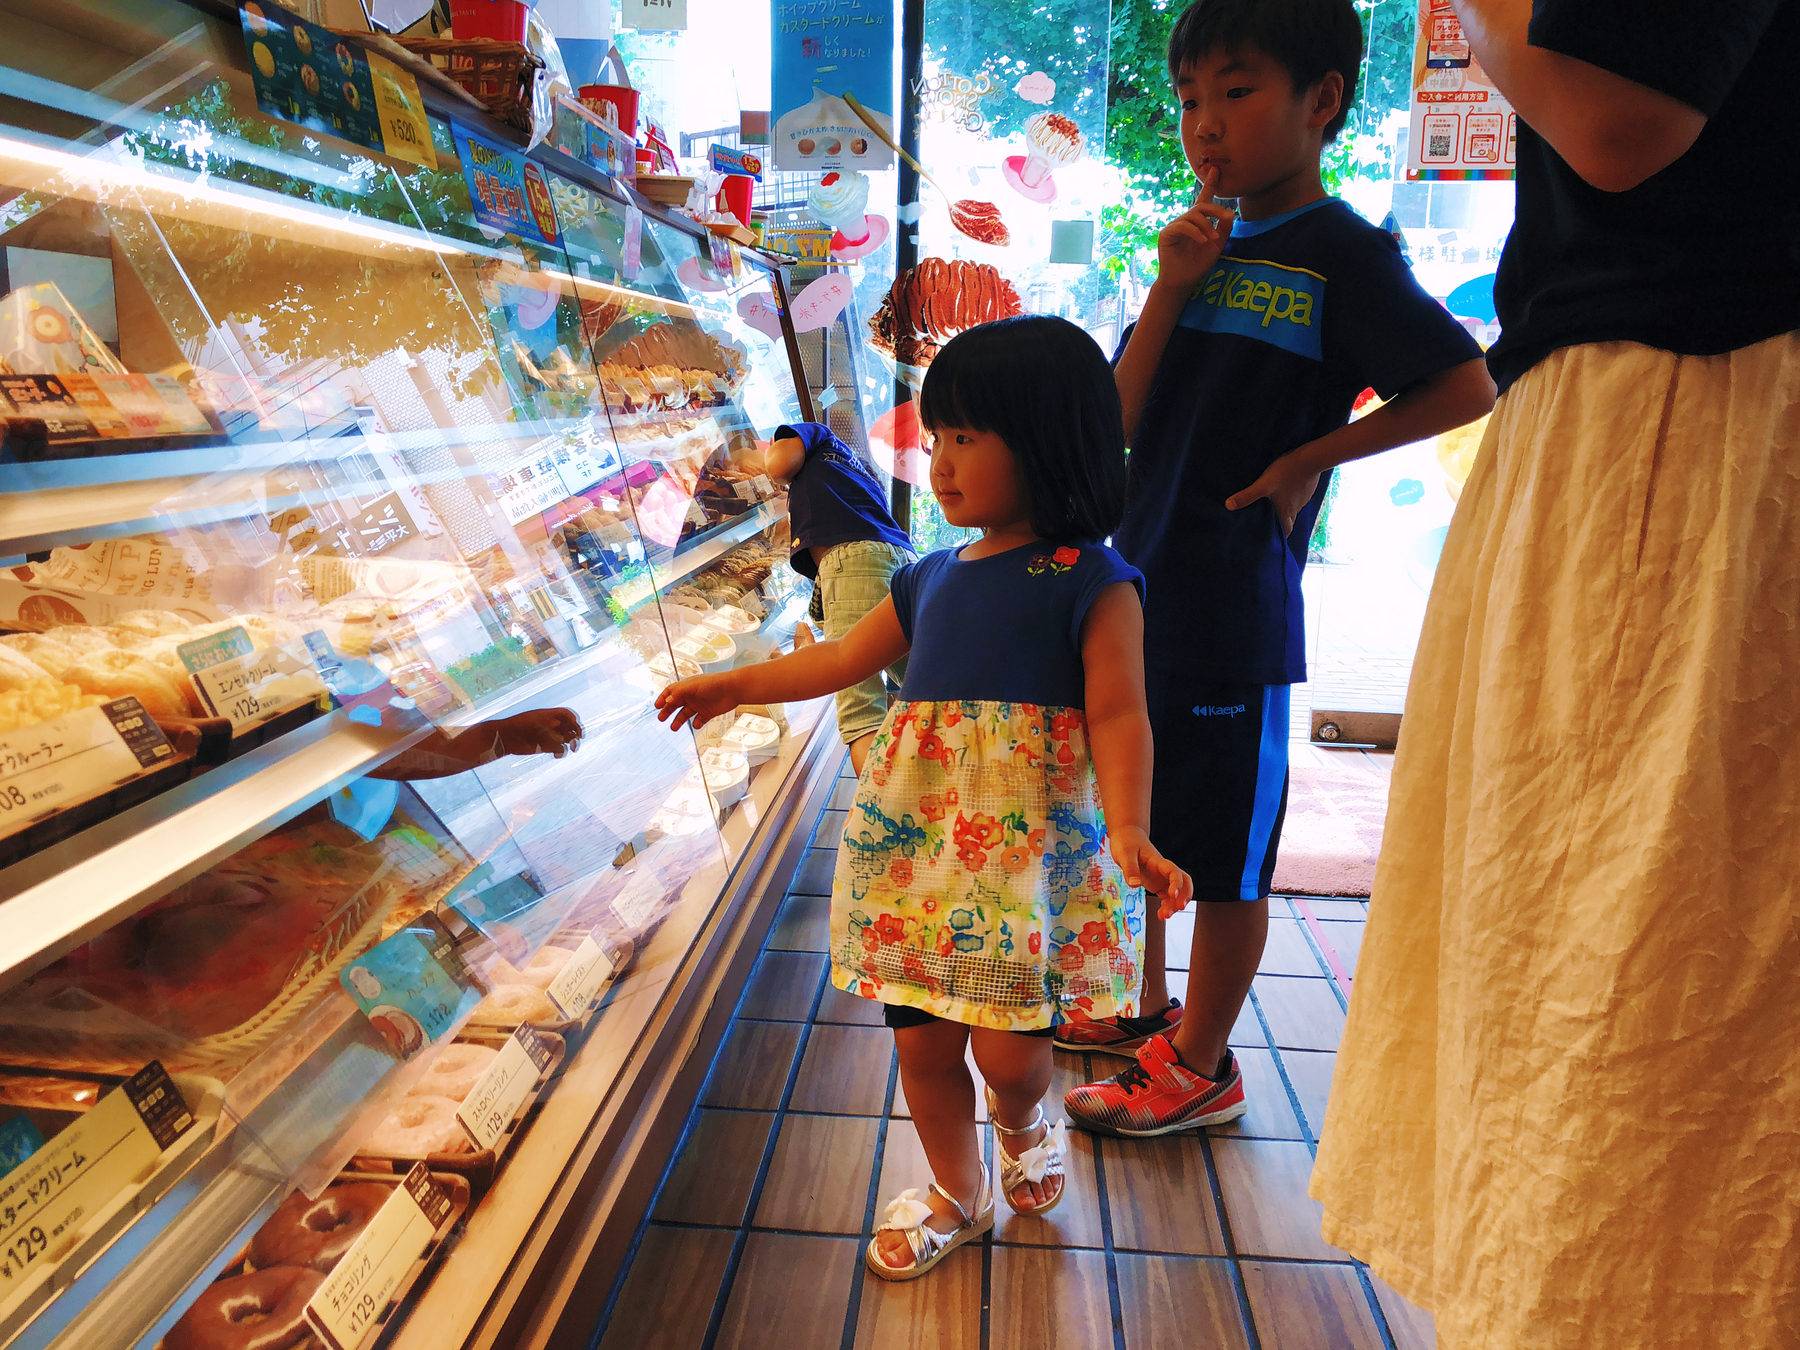 Kids in a candy store, looking at the display